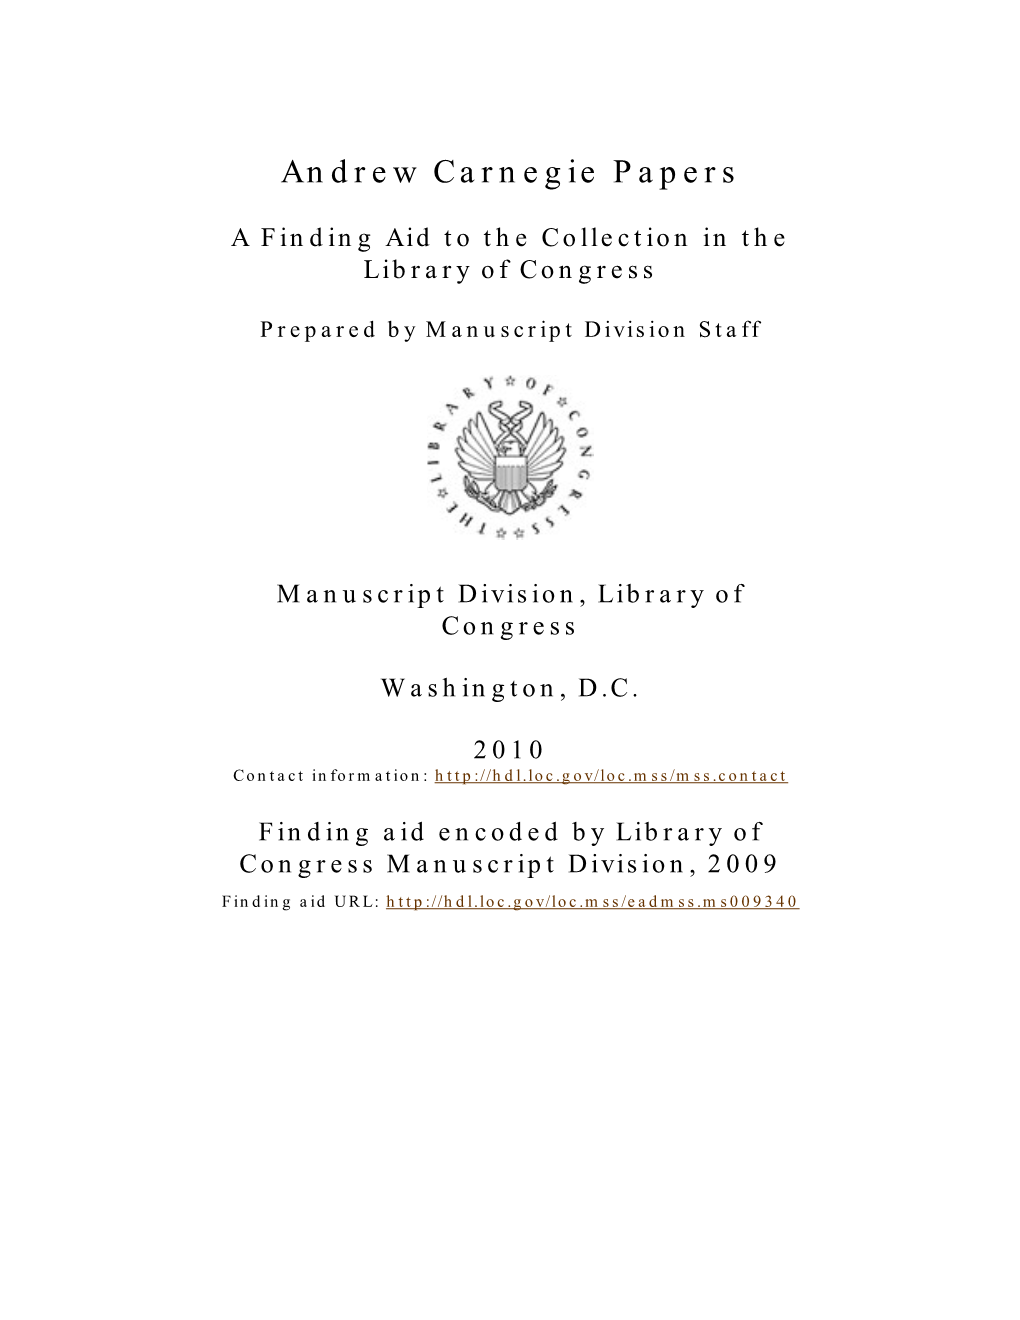 Andrew Carnegie Papers